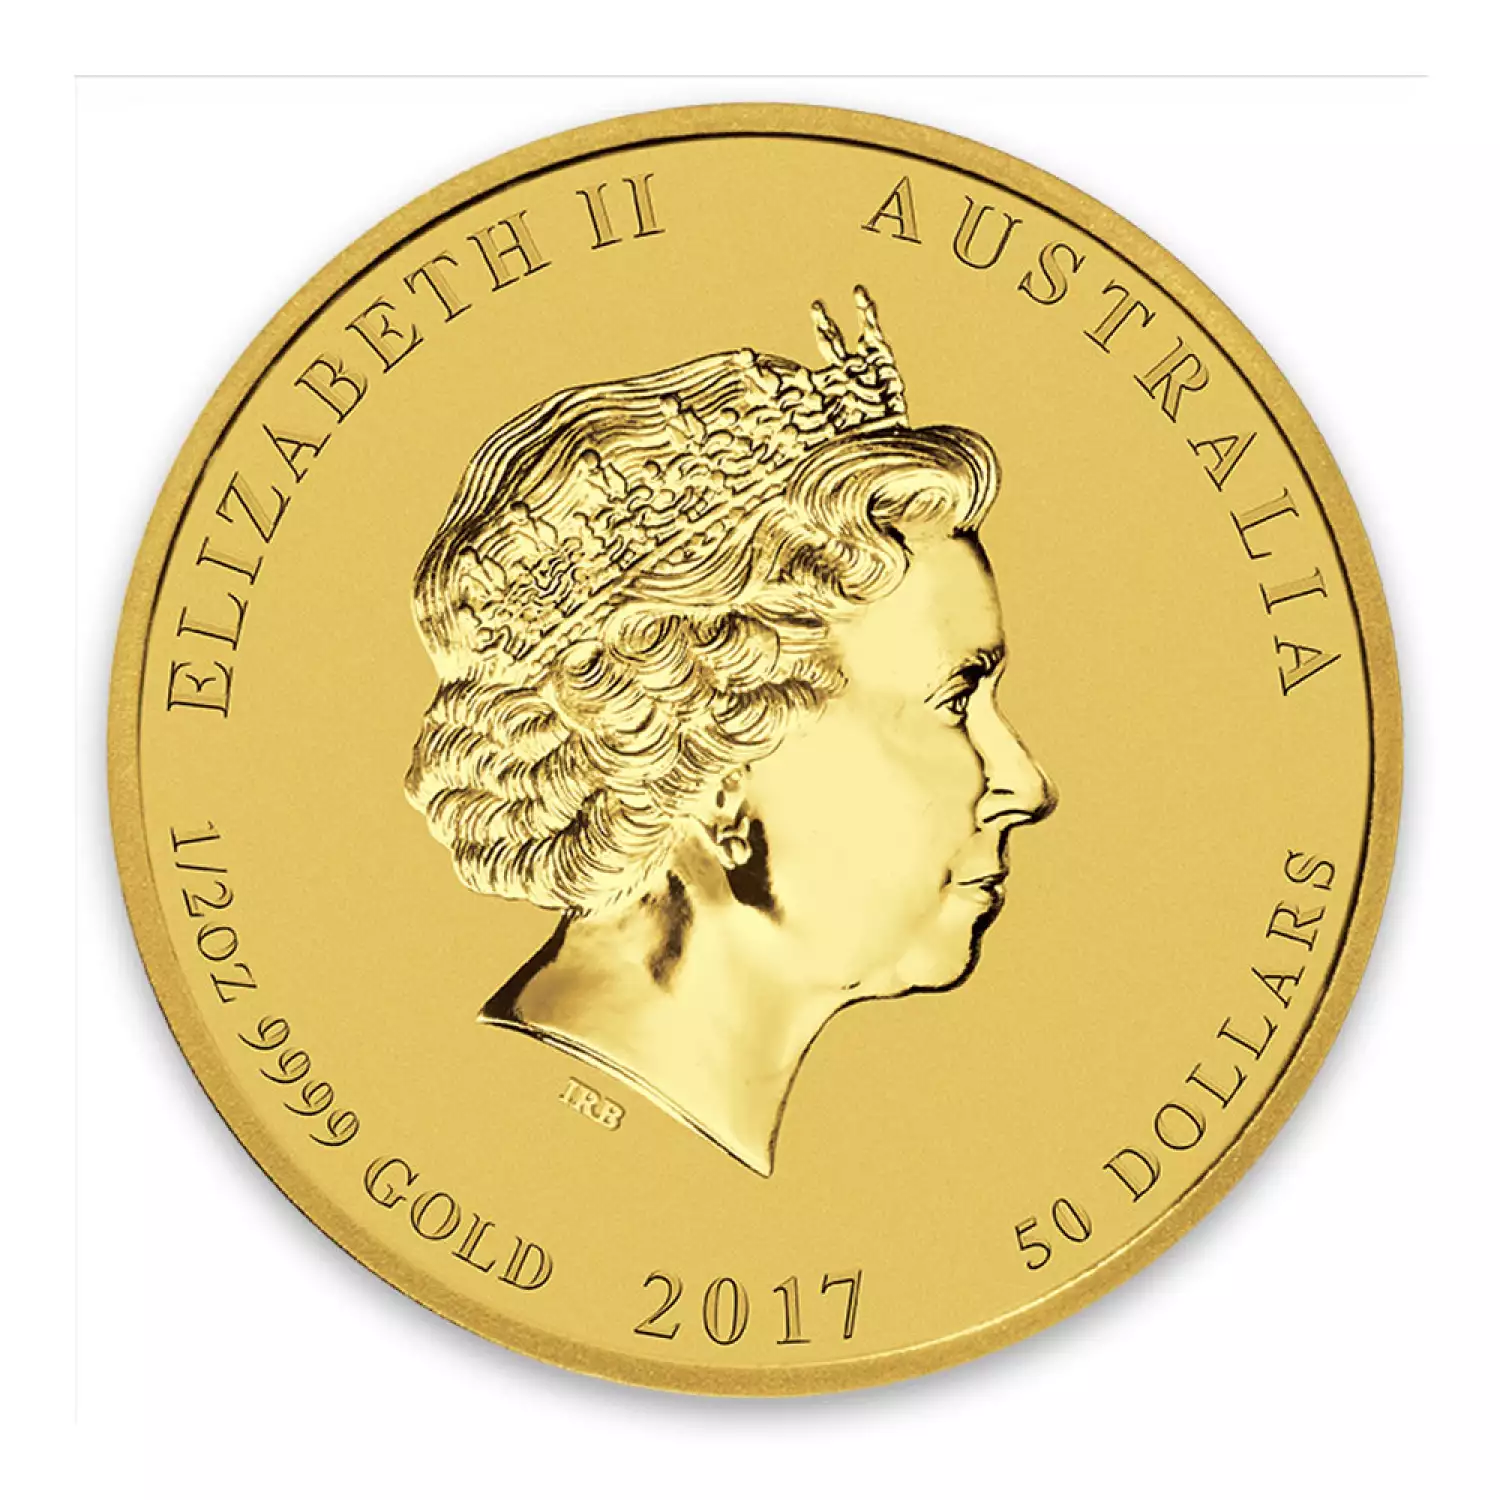 2017 1/2 oz Australian Perth Mint Gold Lunar II: Year of the Rooster (2)